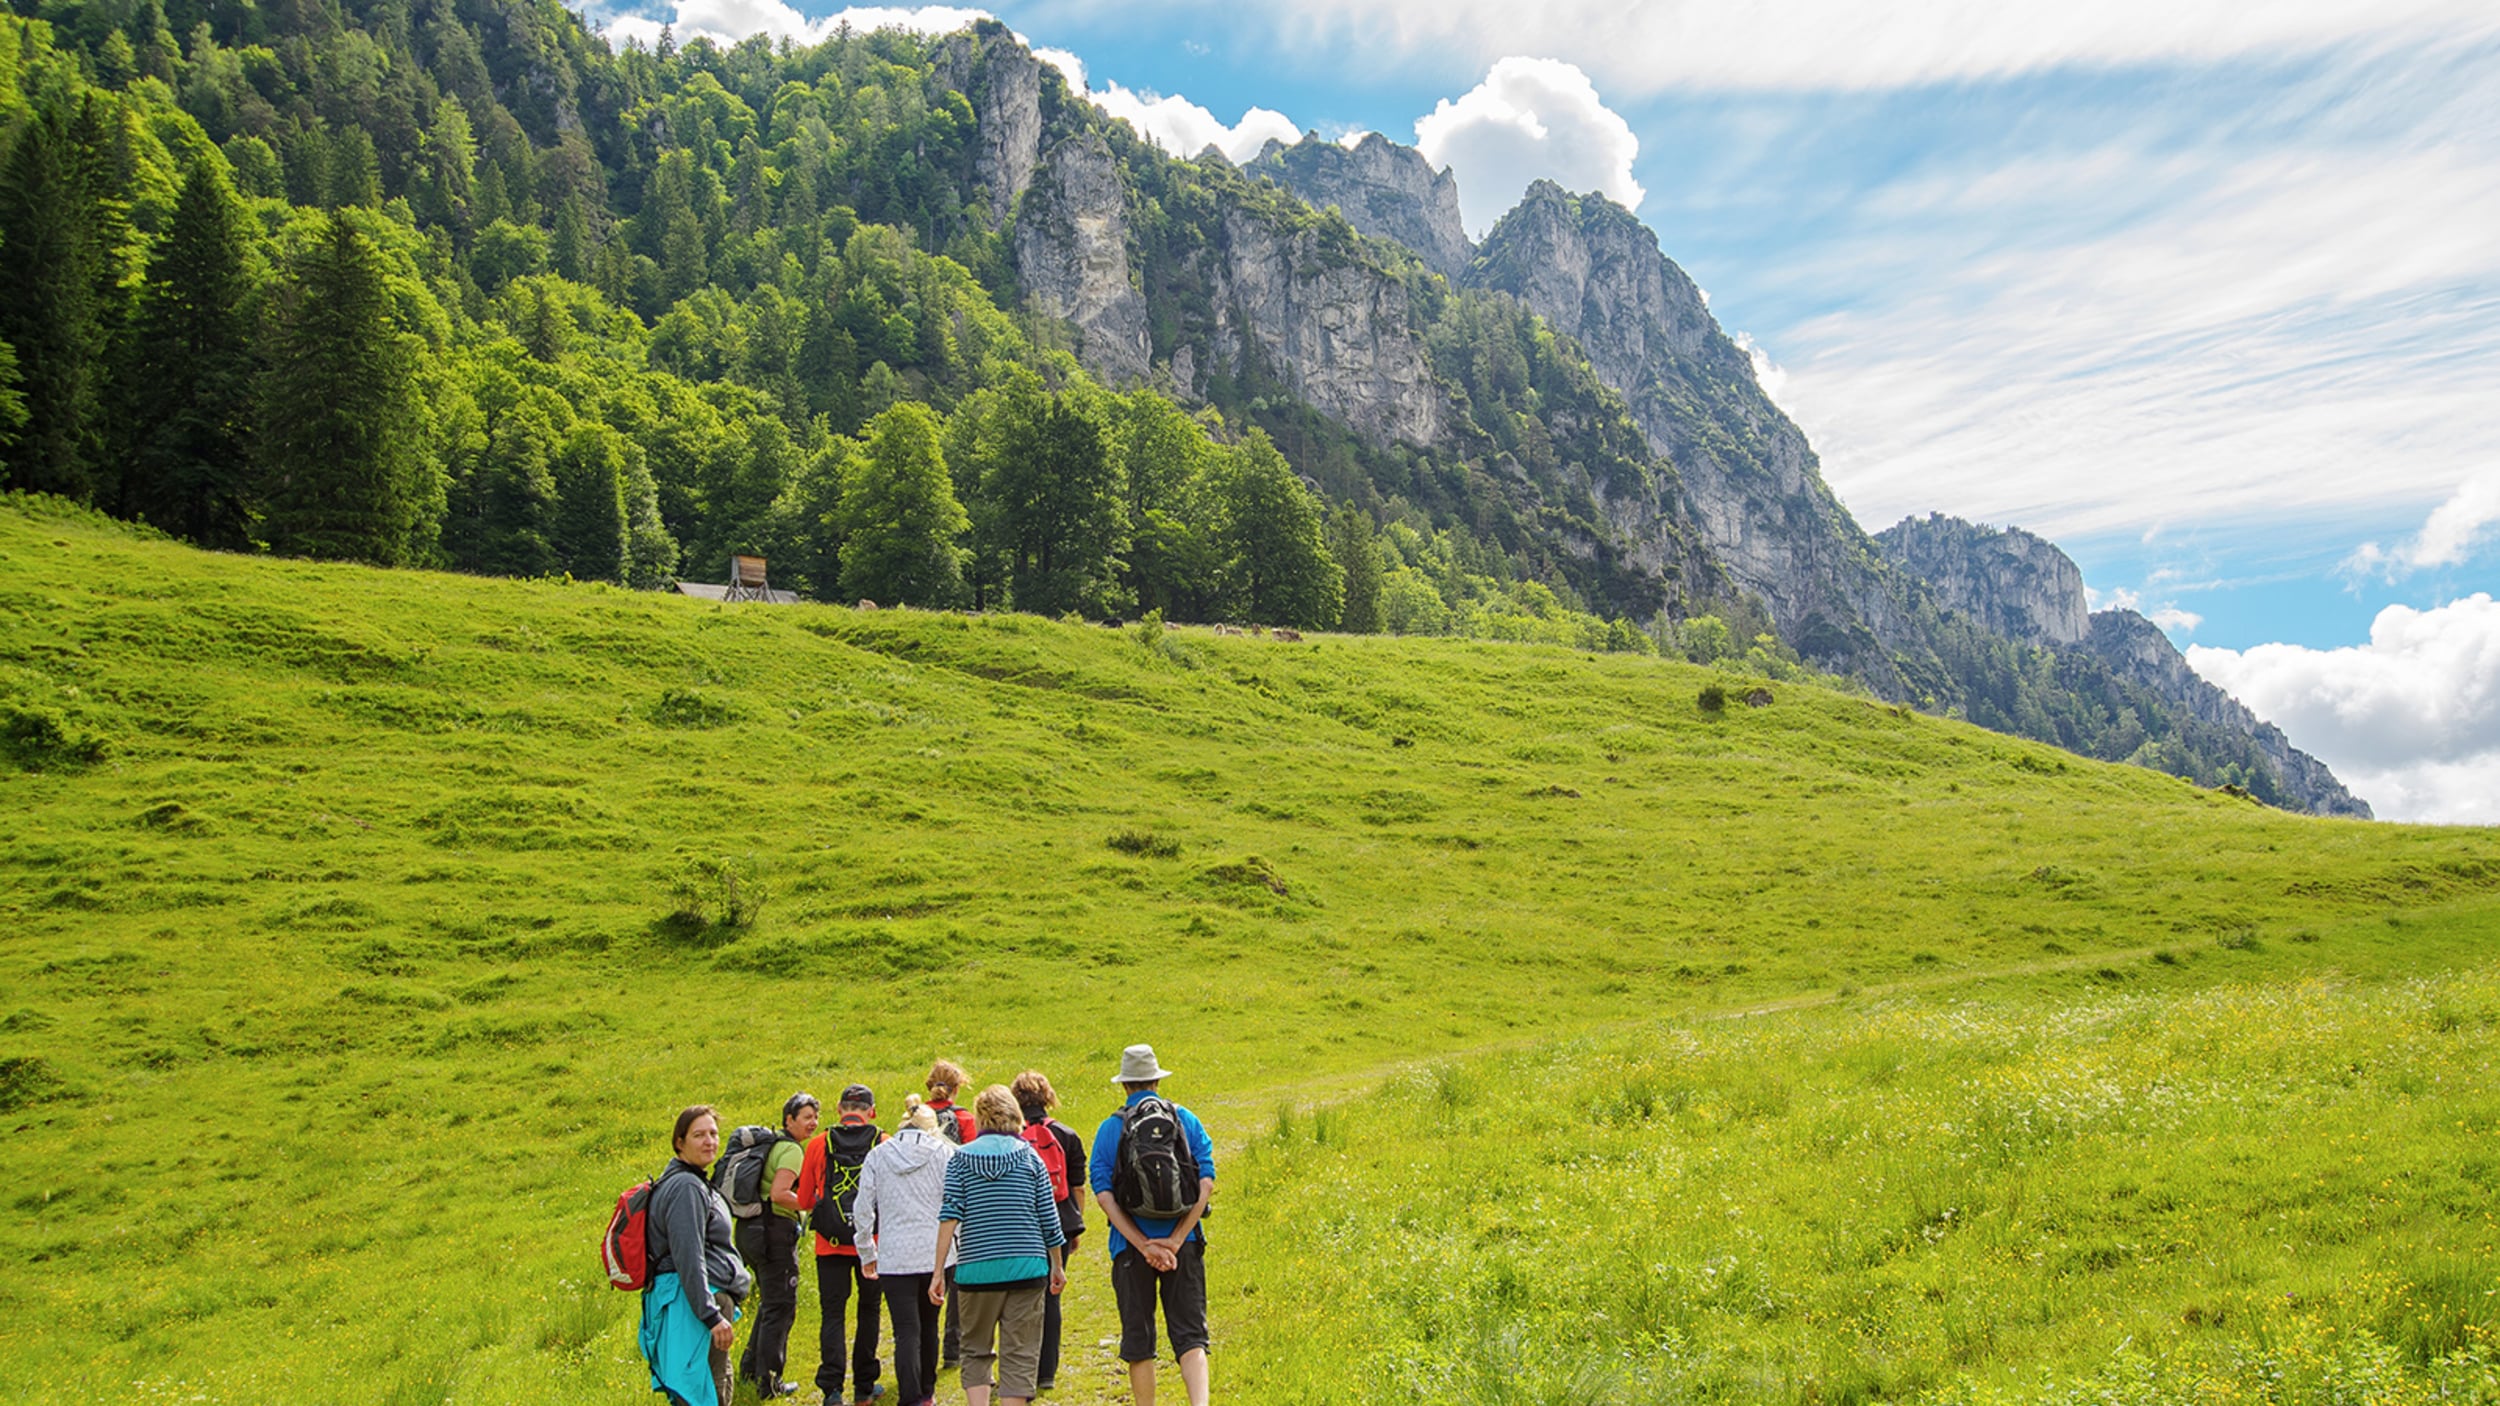 IN THE LIMESTONE ALPS NATIONAL PARK